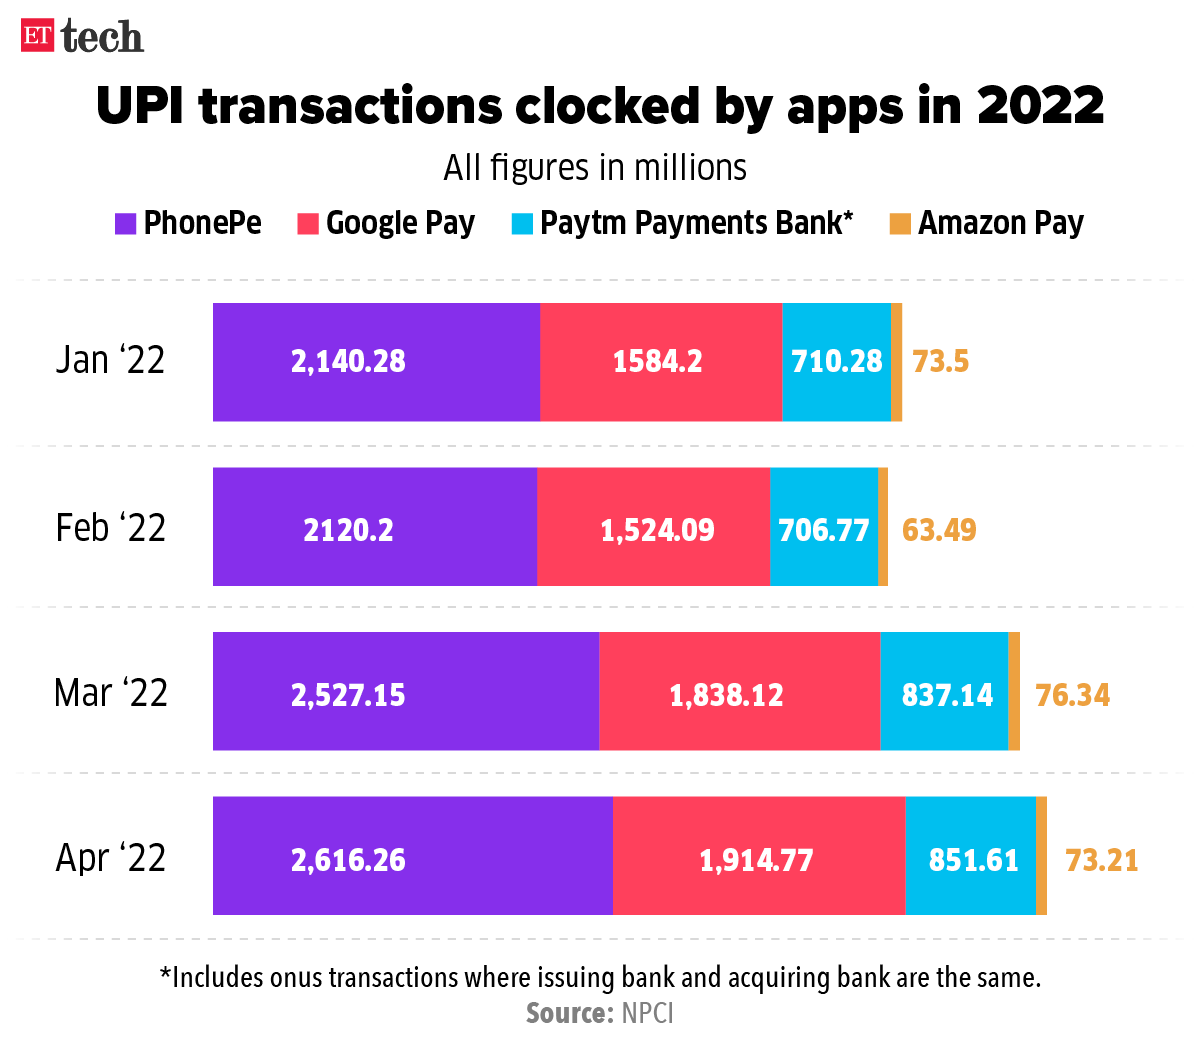 upi transactions clocked by apps in 2022